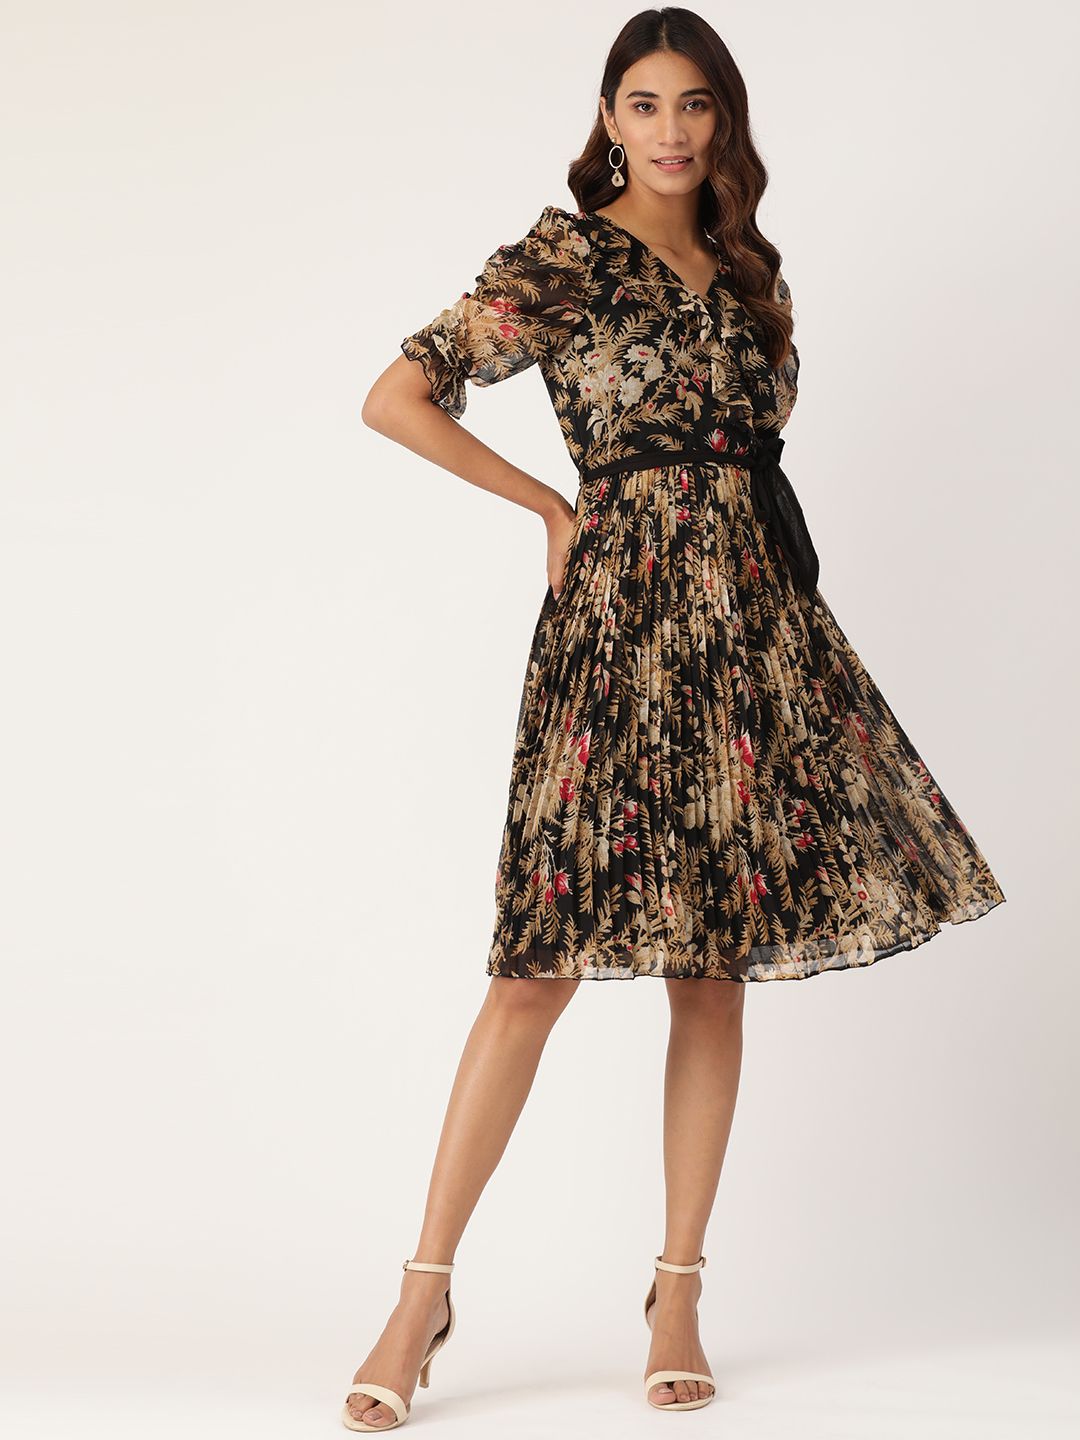 Antheaa Black & Beige Floral Printed Accordion Pleated Wrap Dress With Belt Price in India